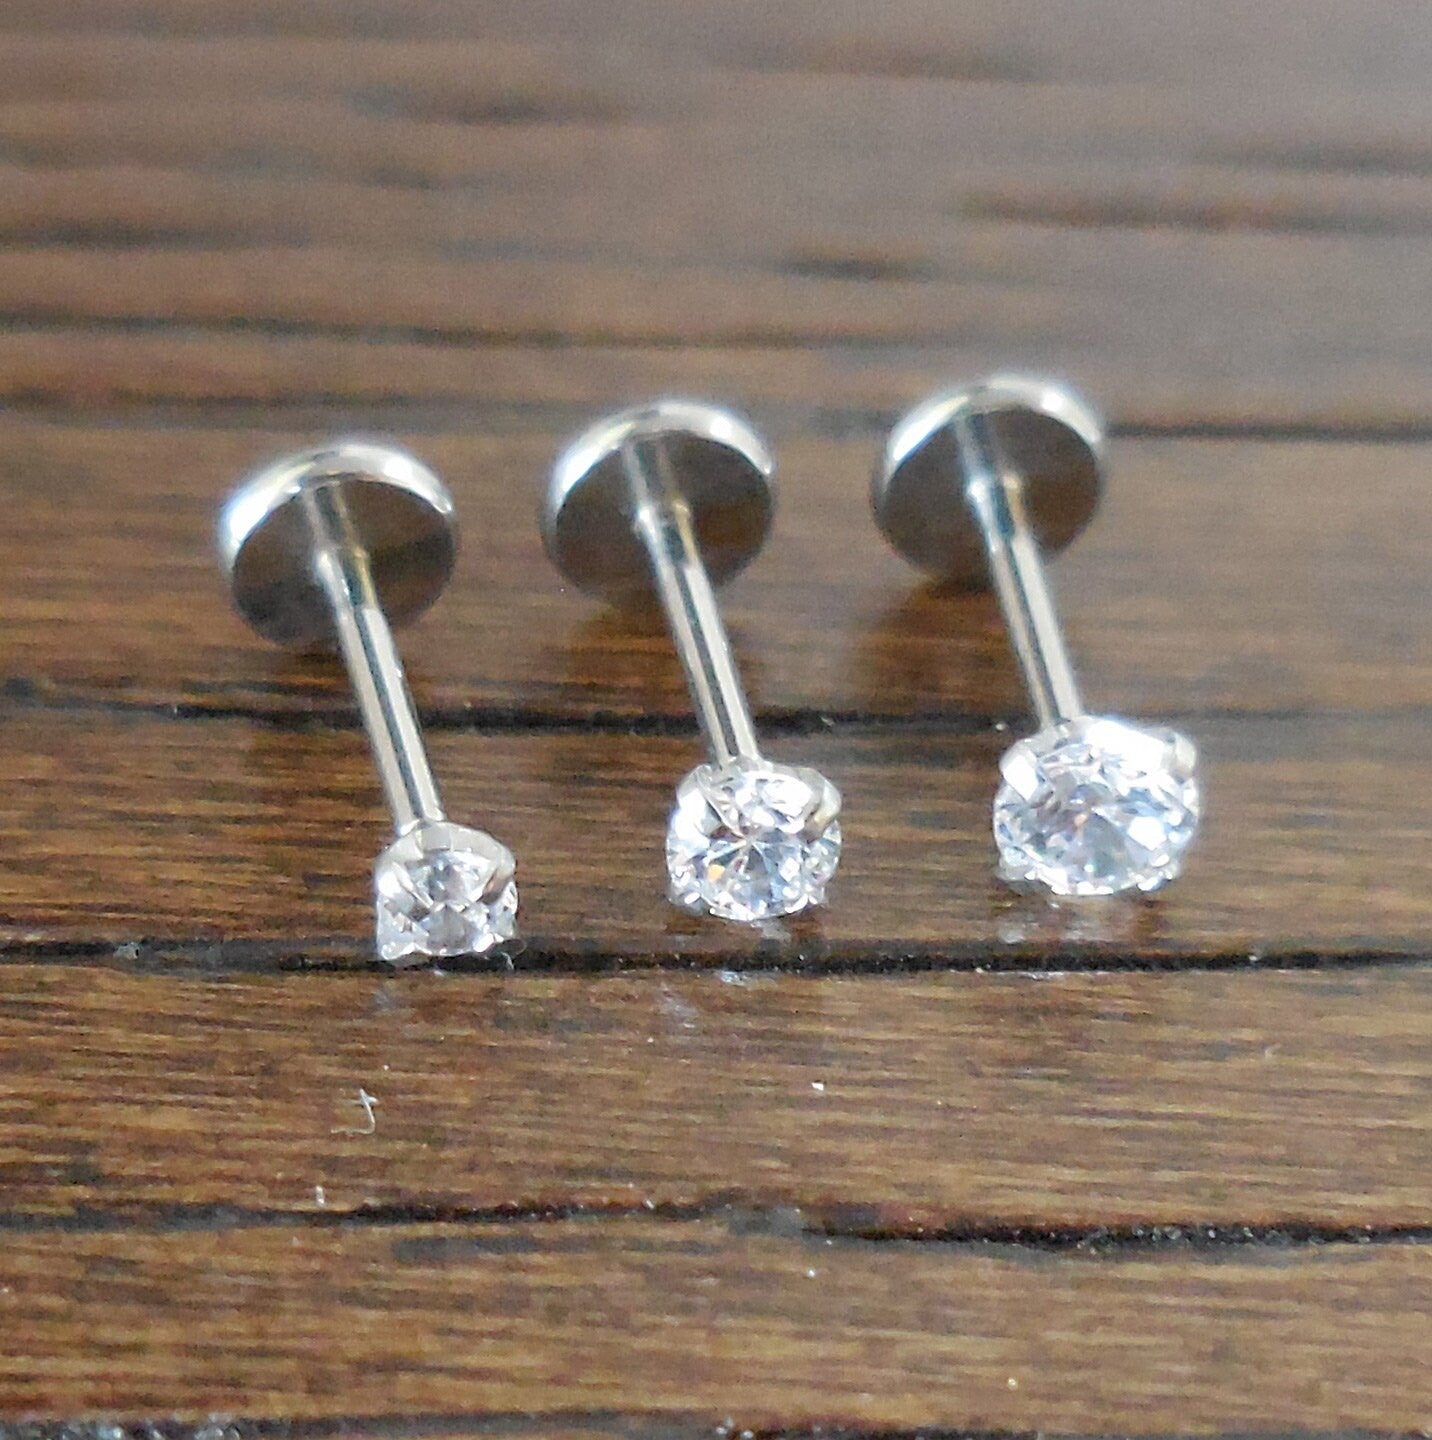 20G 2-4mm Tragus Threadless 6mm-8mm Push Pin Prong Set Clear Cubic Zirconia CZ Triple Helix Nose Ring Labret Lip Earrings Steel